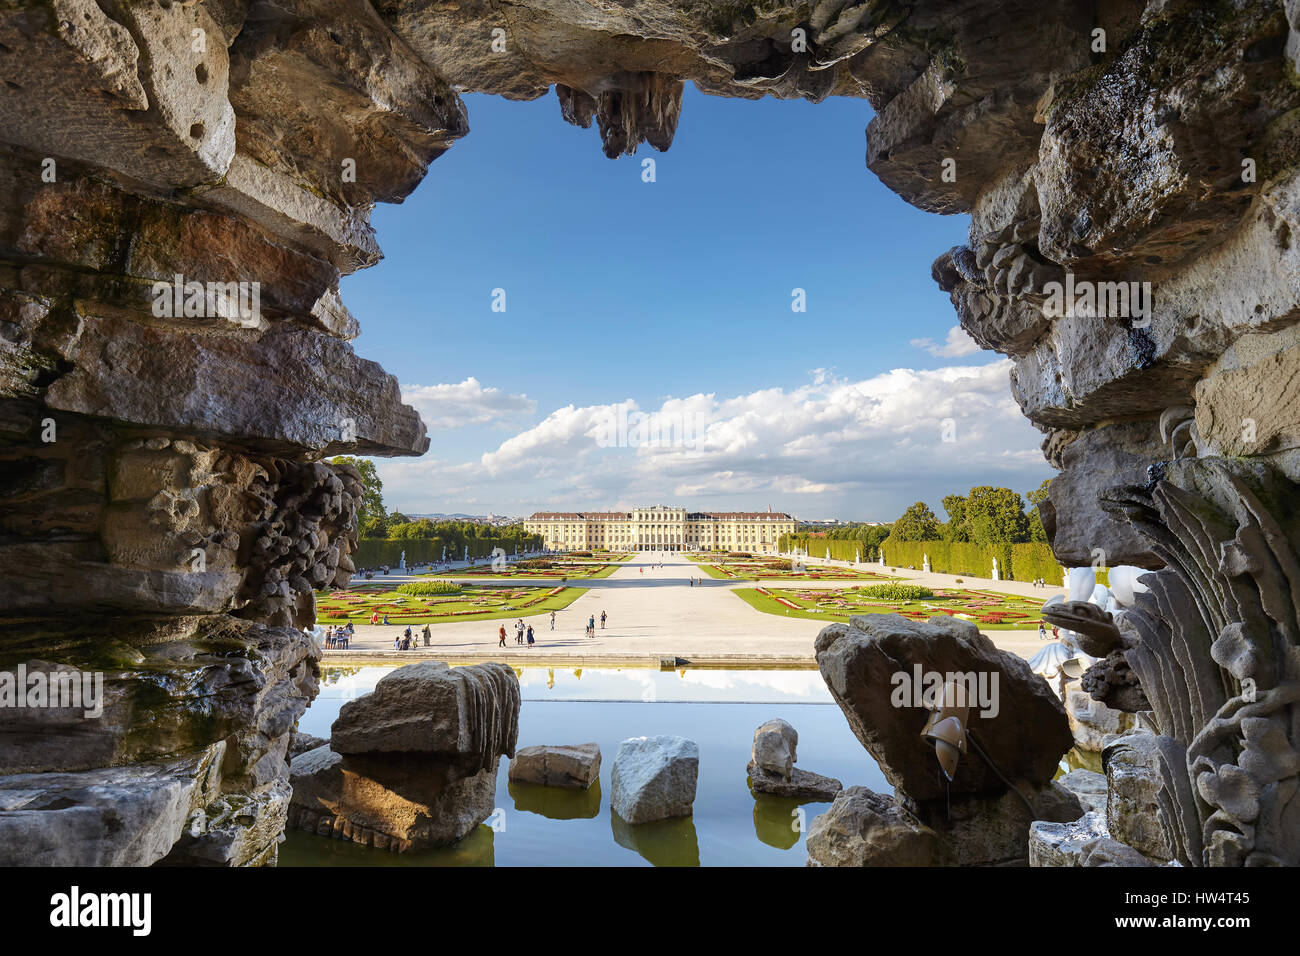 Vienna, Austria - August 14, 2016: Fountain view of the Schonbrunn Palace, former imperial summer residence and a major tourist attraction in the city Stock Photo